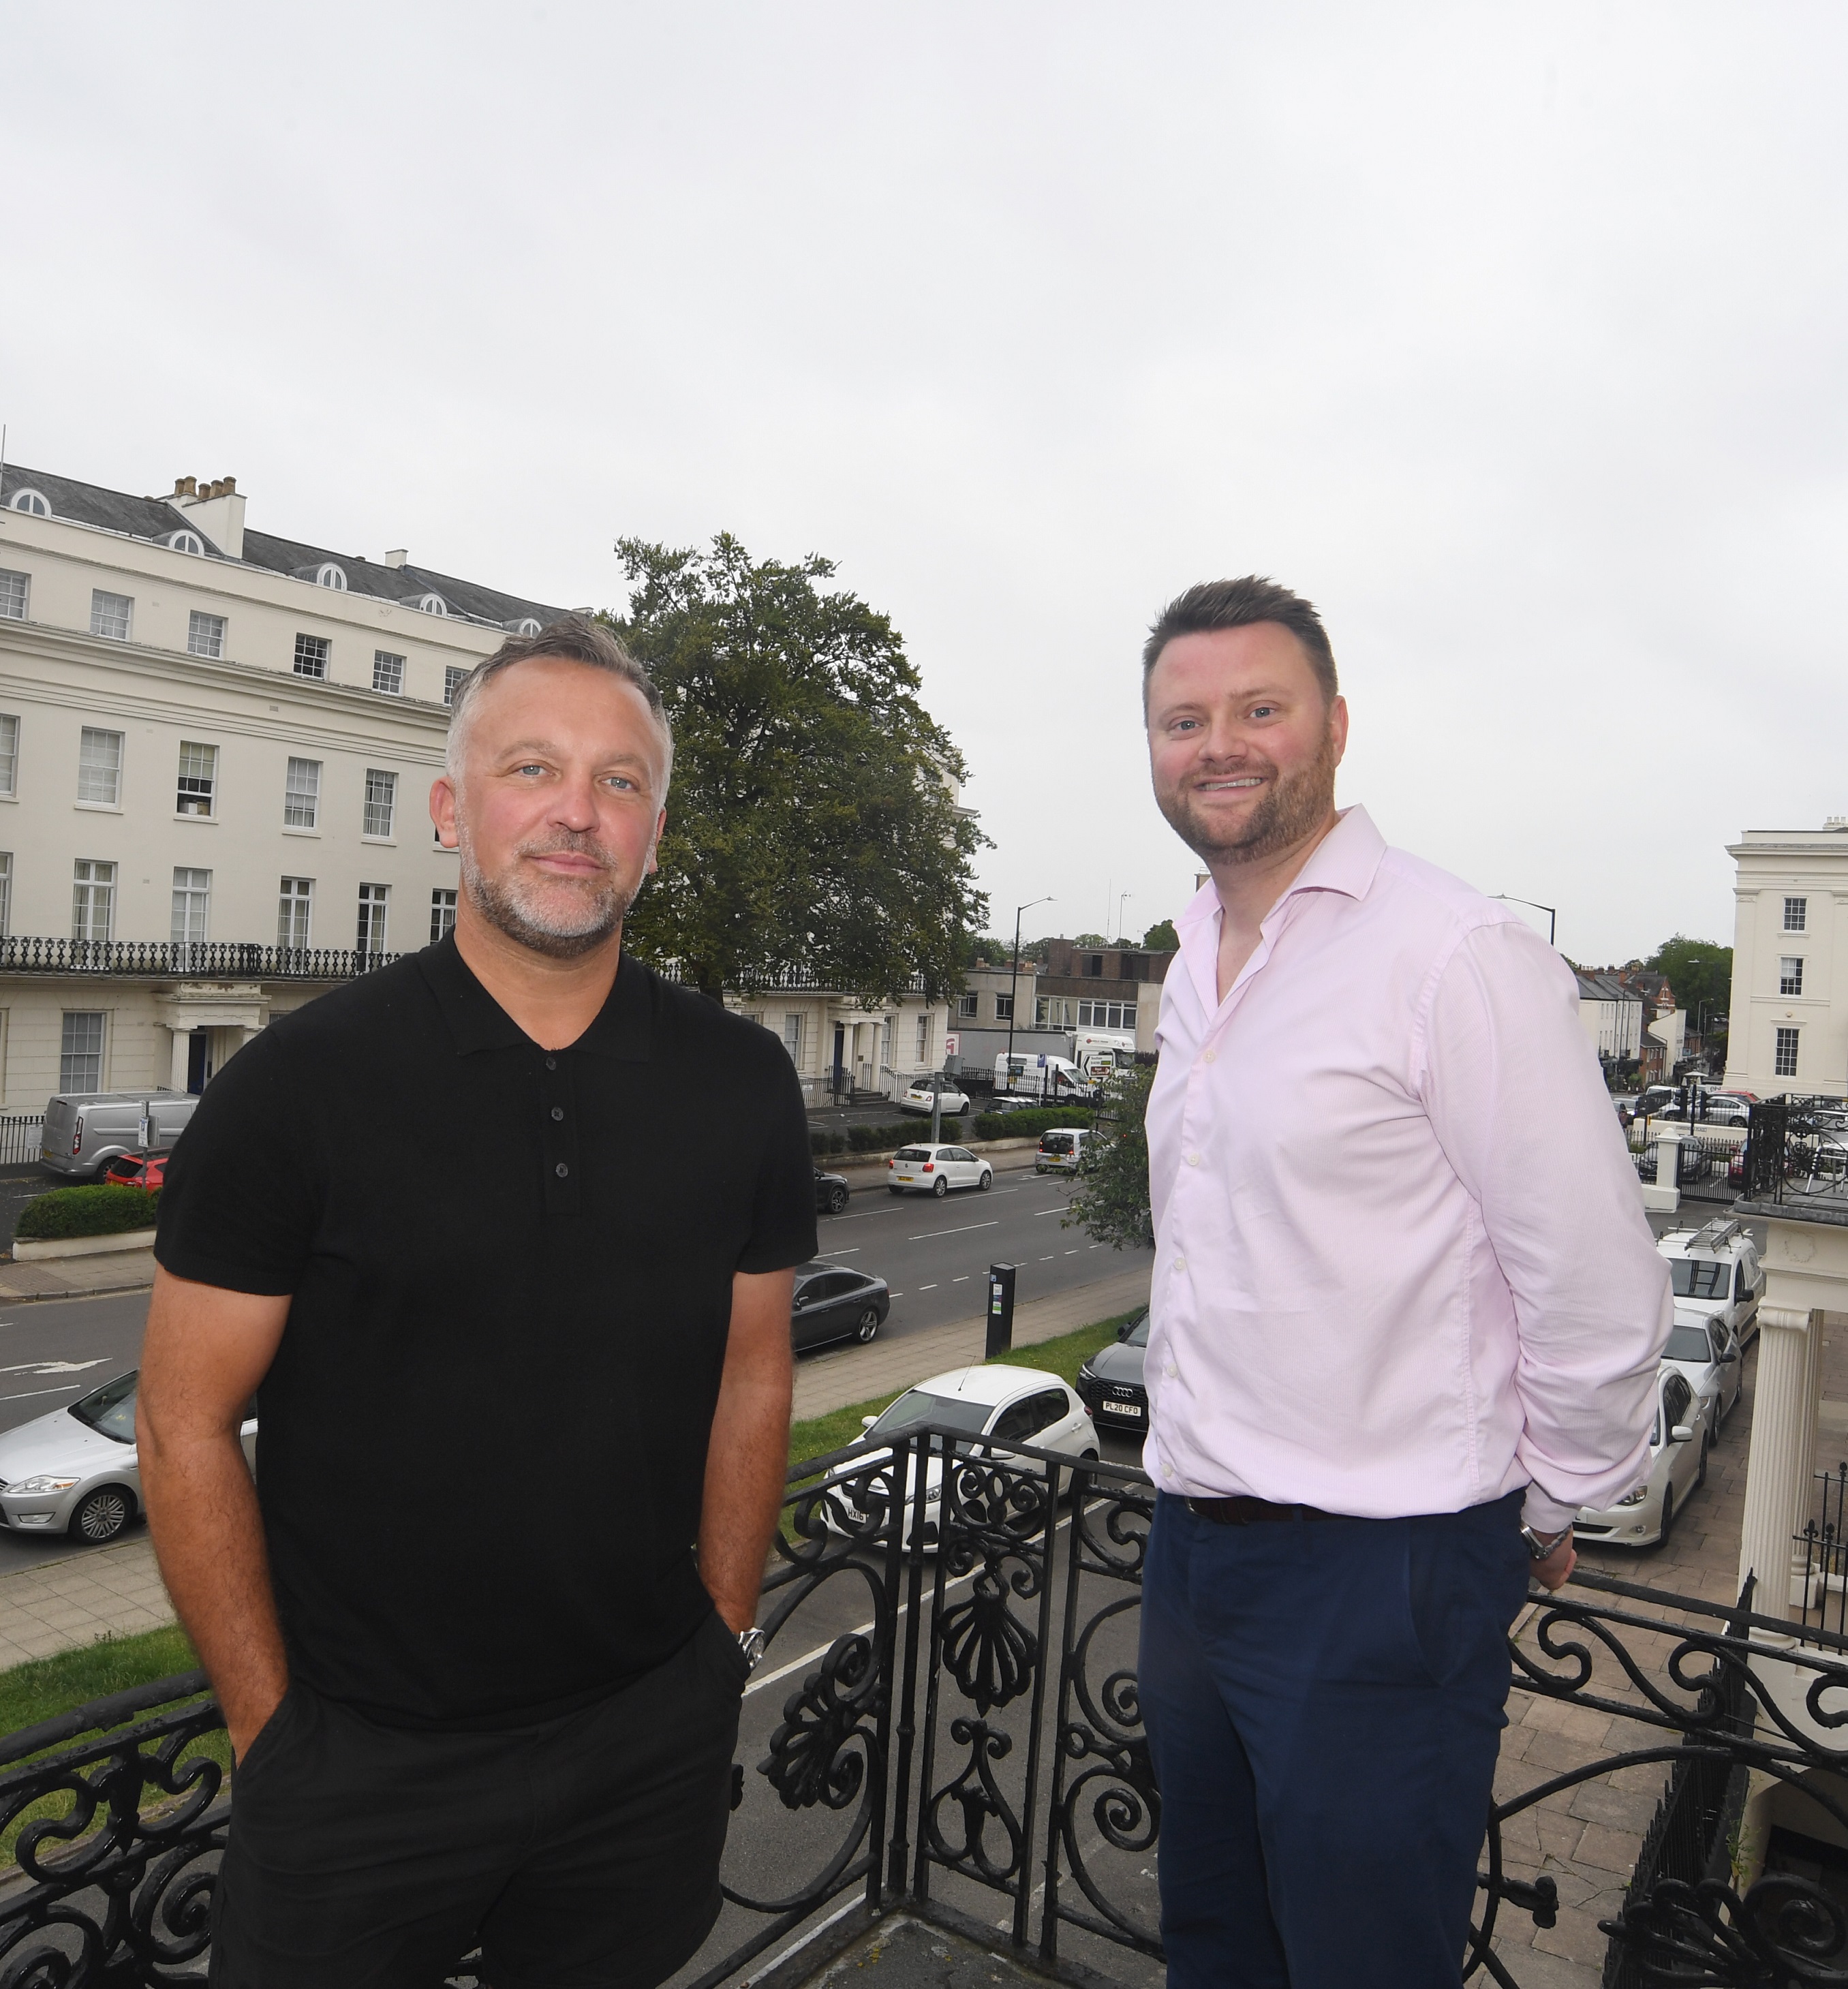 Law firm moving to vibrant offices in Leamington Spa